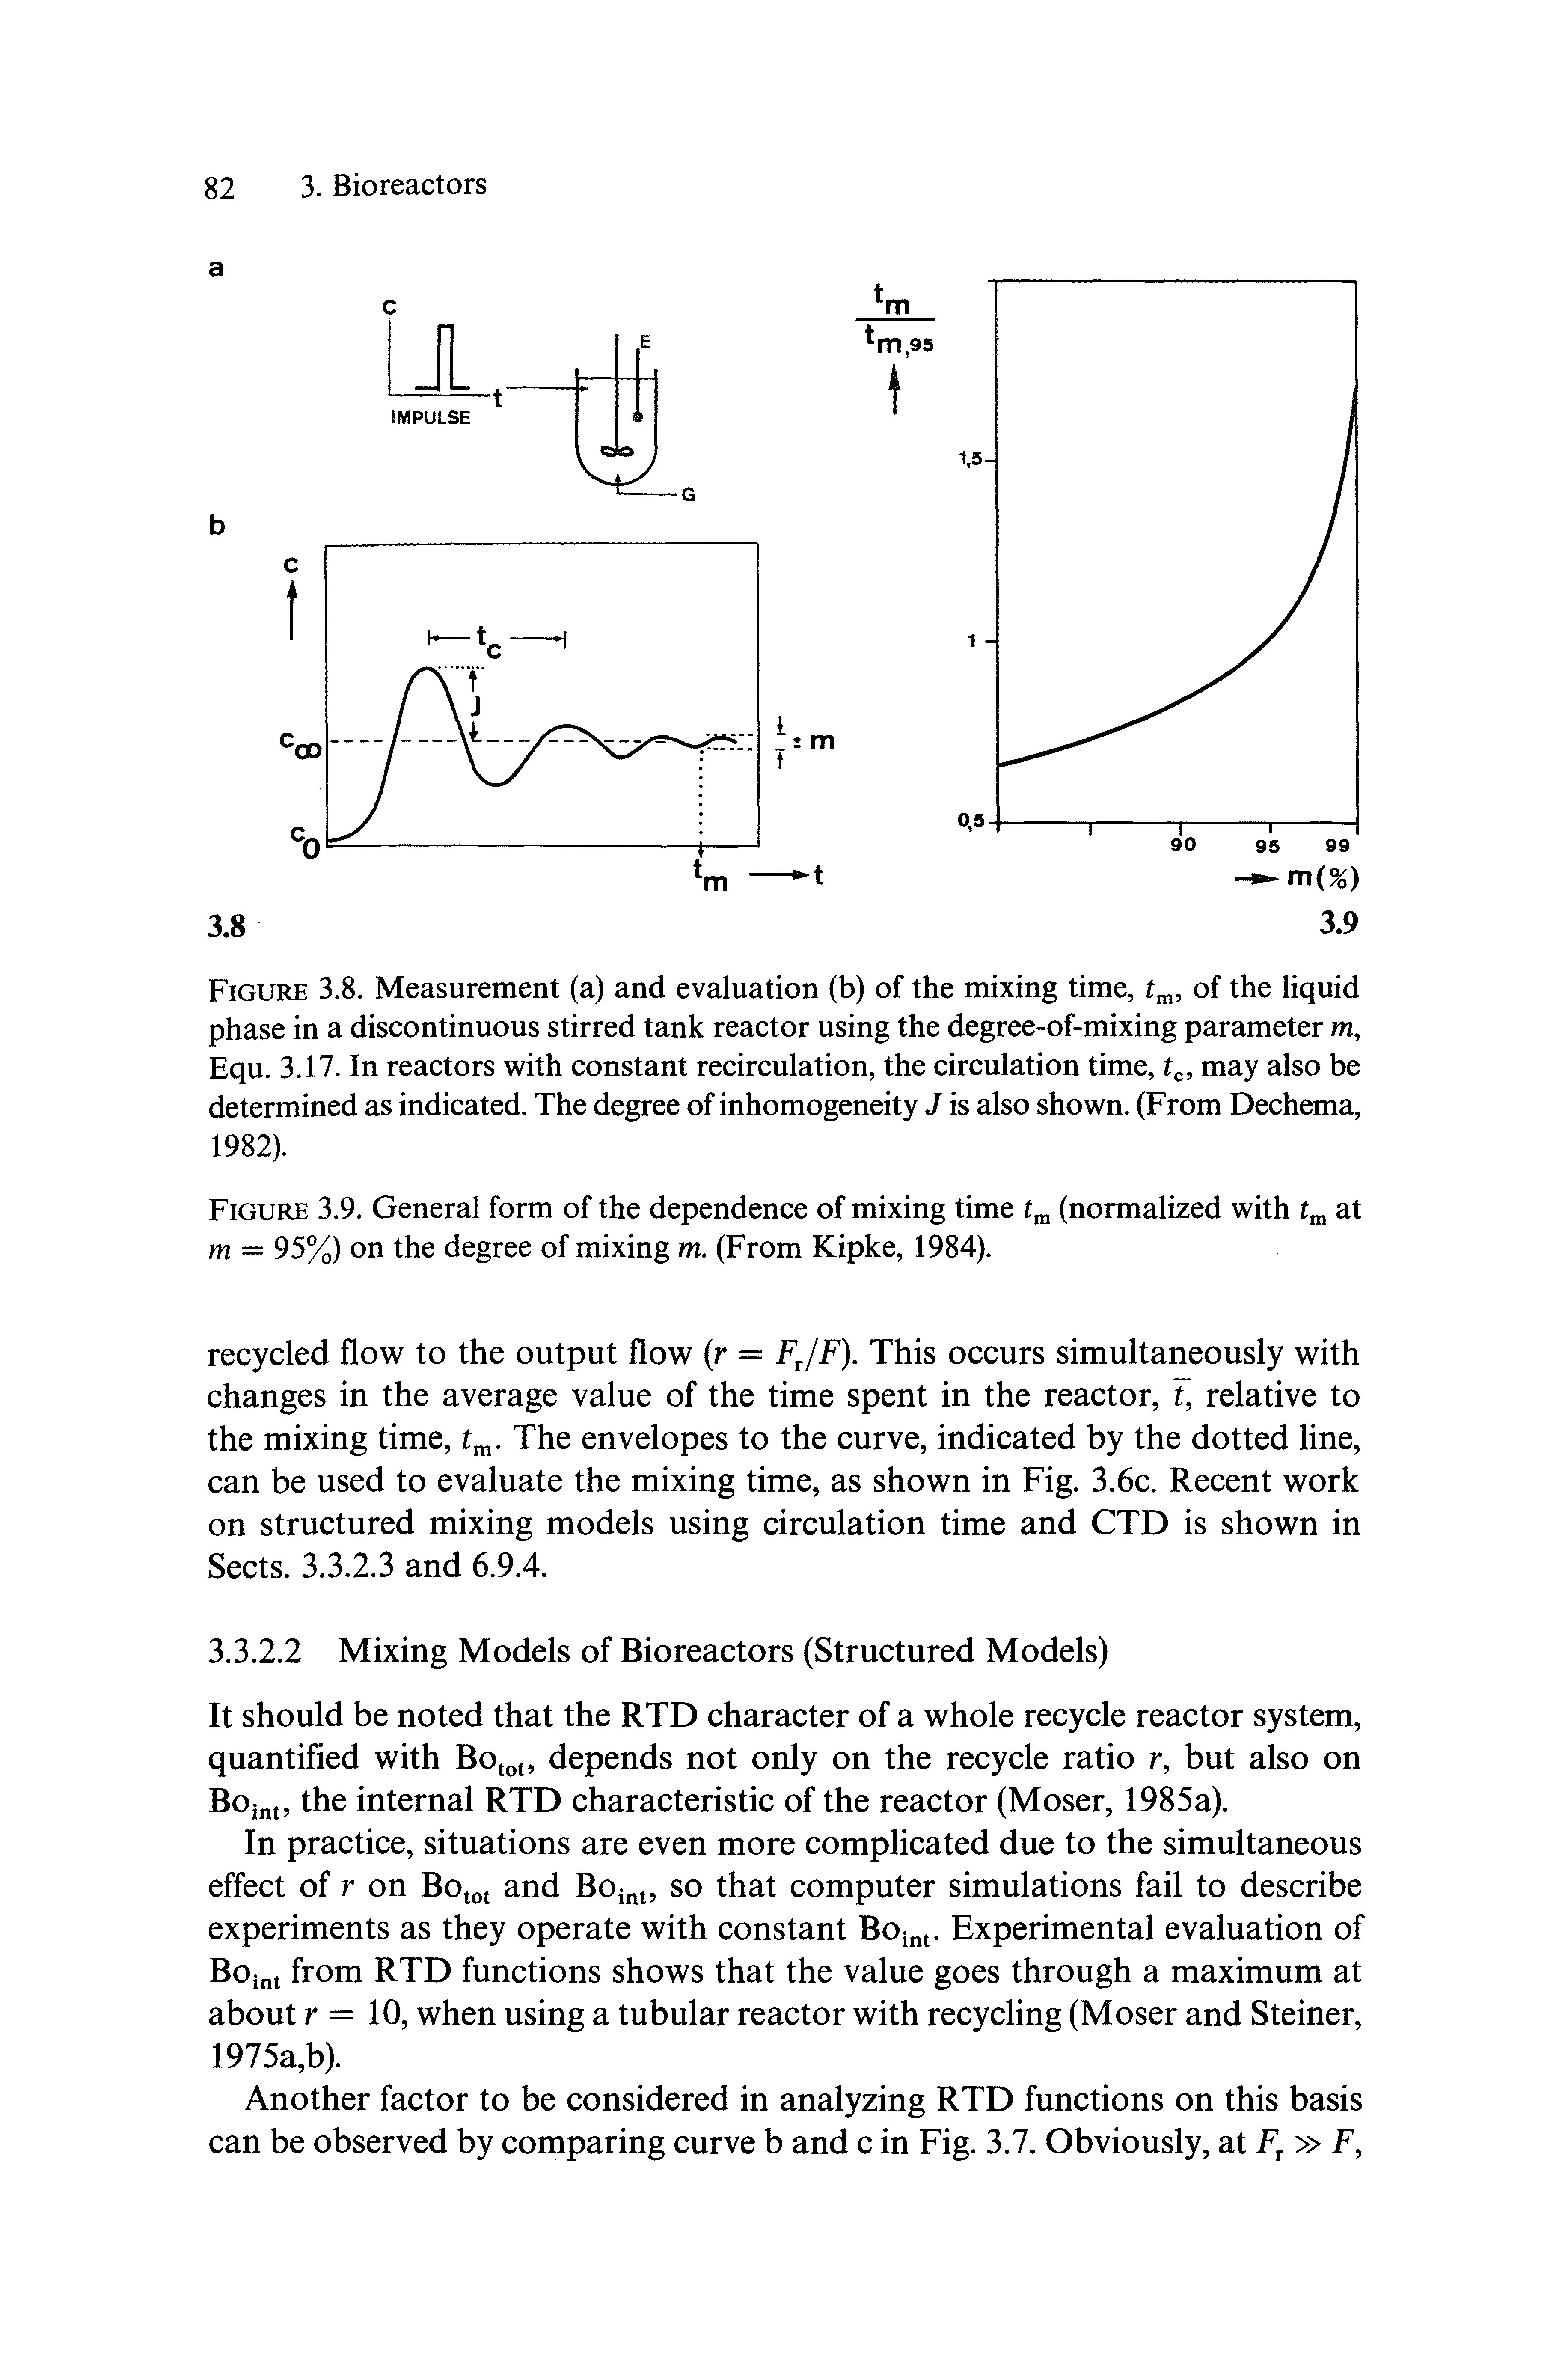 Figure 3.8. Measurement (a) and evaluation (b) of the mixing time, of the liquid phase in a discontinuous stirred tank reactor using the degree-of-mixing parameter m, Equ. 3.17. In reactors with constant recirculation, the circulation time, t, may also be determined as indicated. The degree of inhomogeneity J is also shown. (From Dechema, 1982).